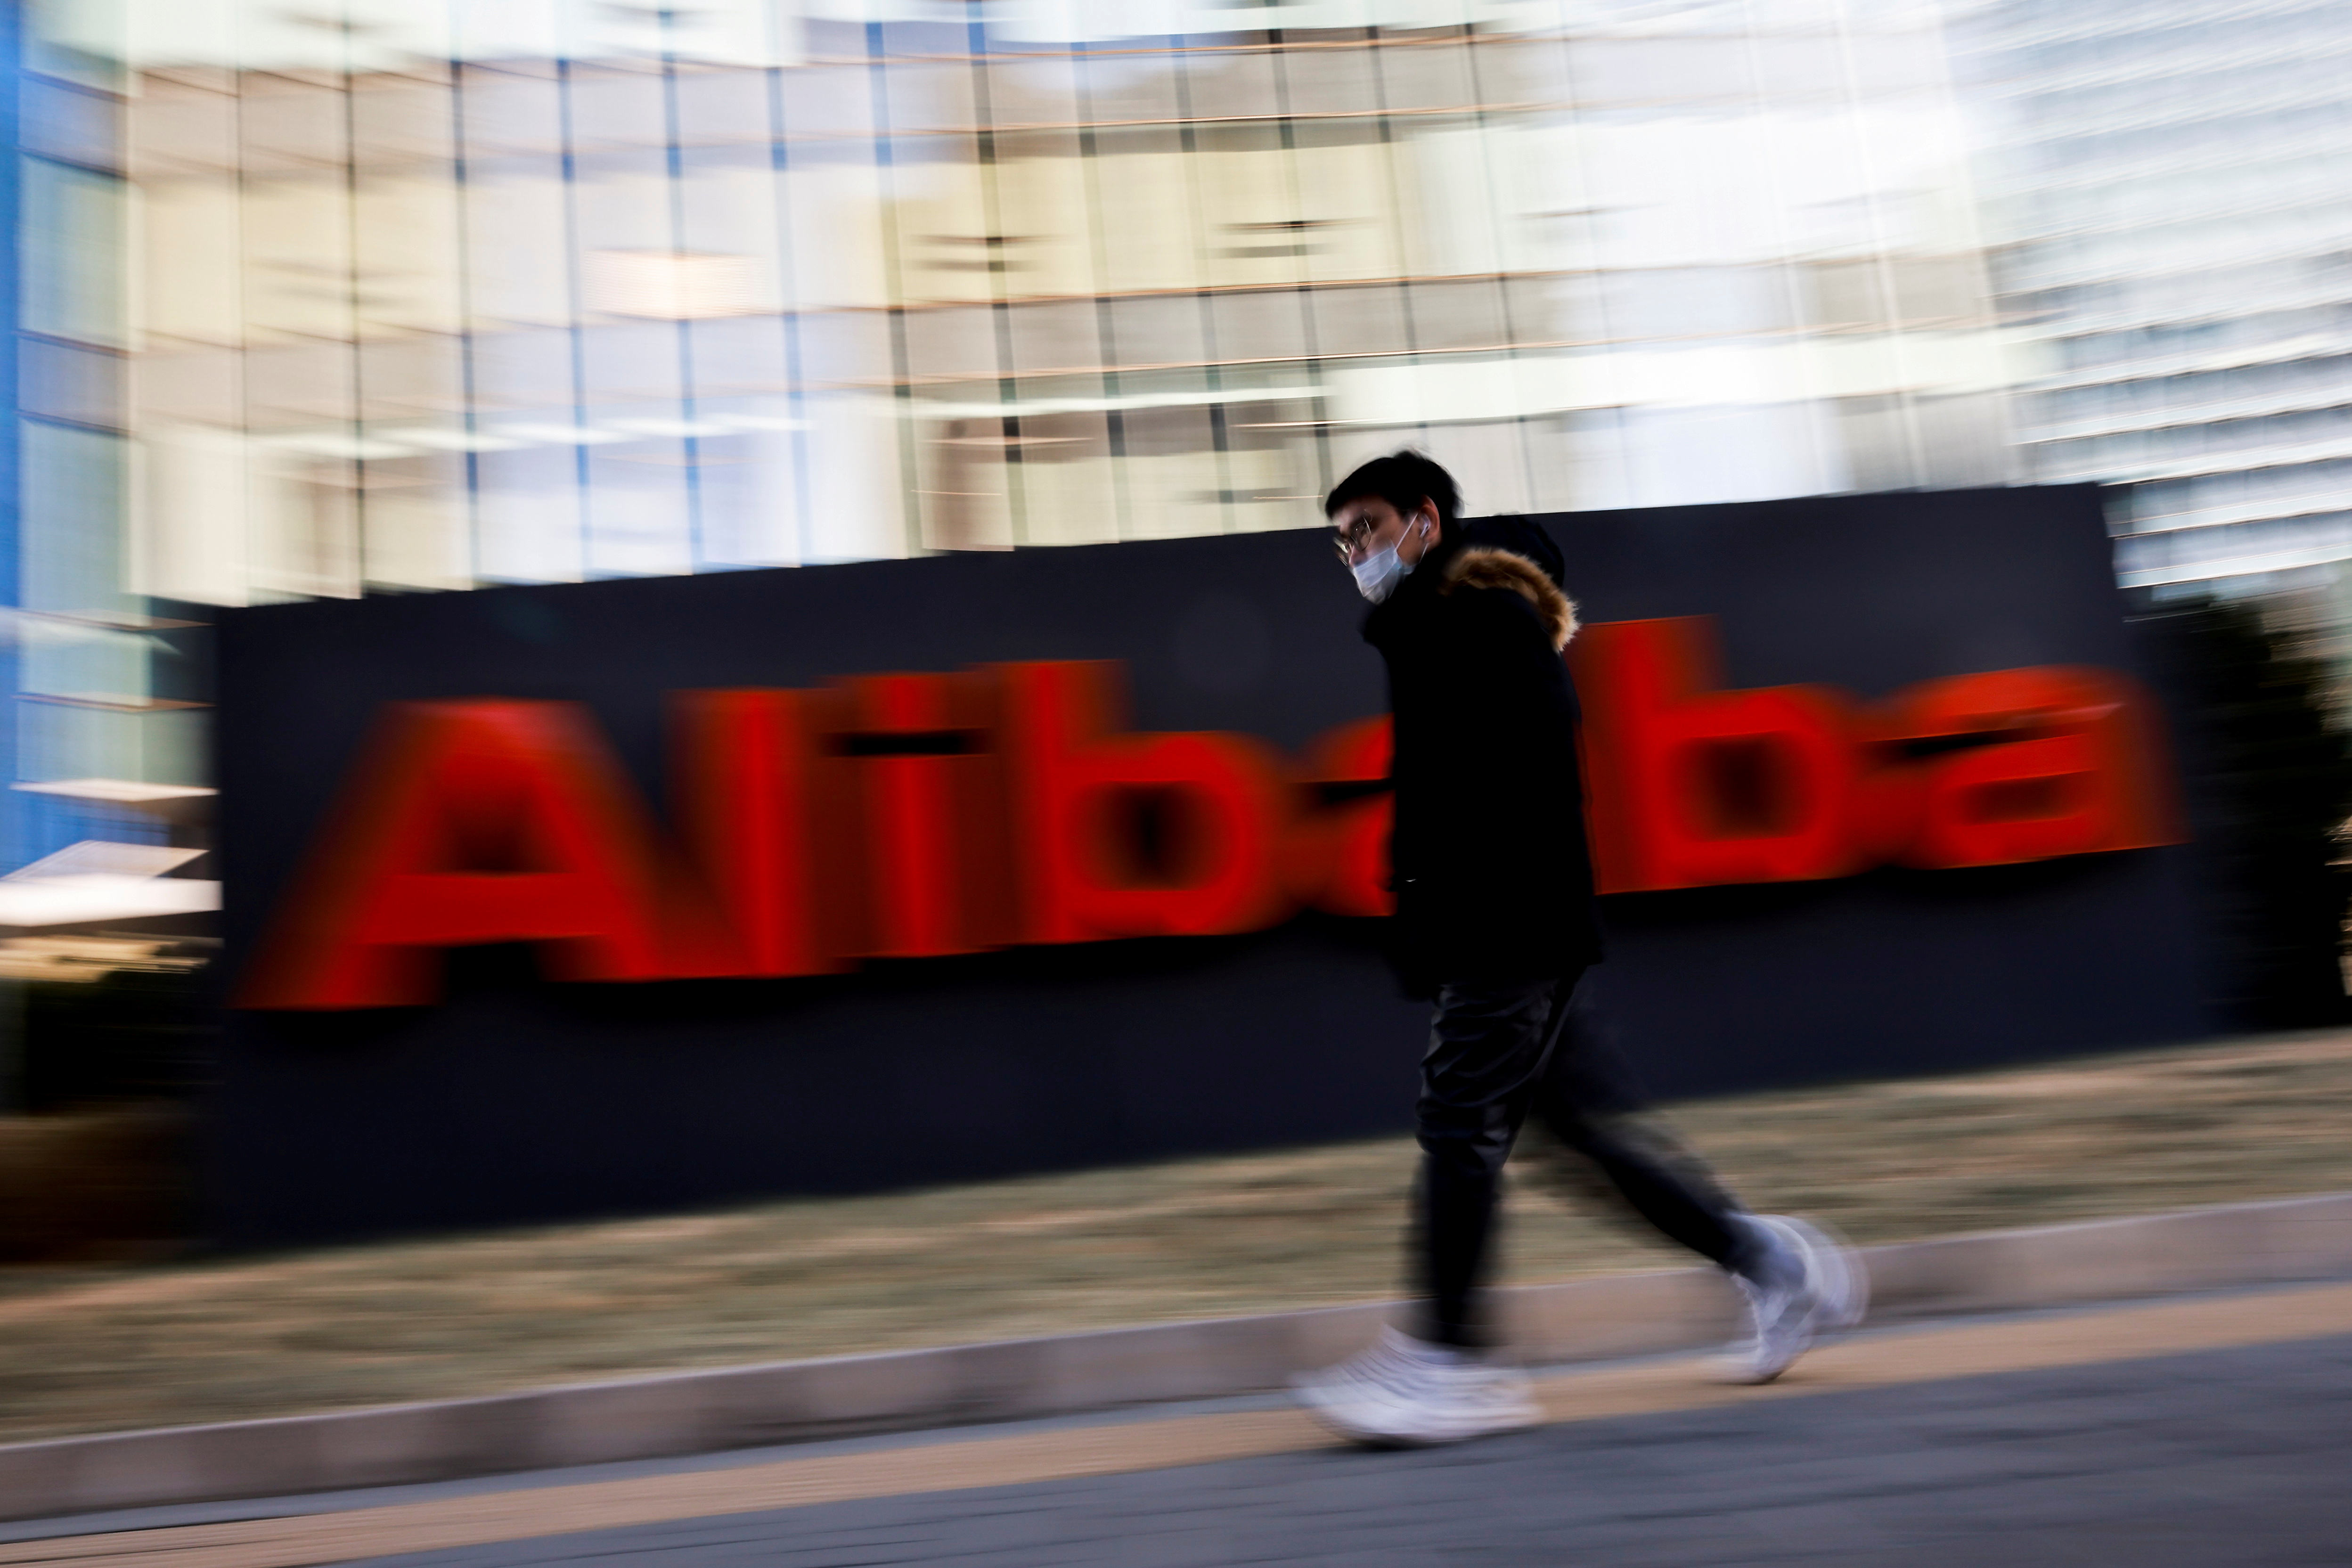 The logo of Alibaba Group is seen at its office in Beijing, China January 5, 2021. REUTERS/Thomas Peter/File Photo  GLOBAL BUSINESS WEEK AHEAD